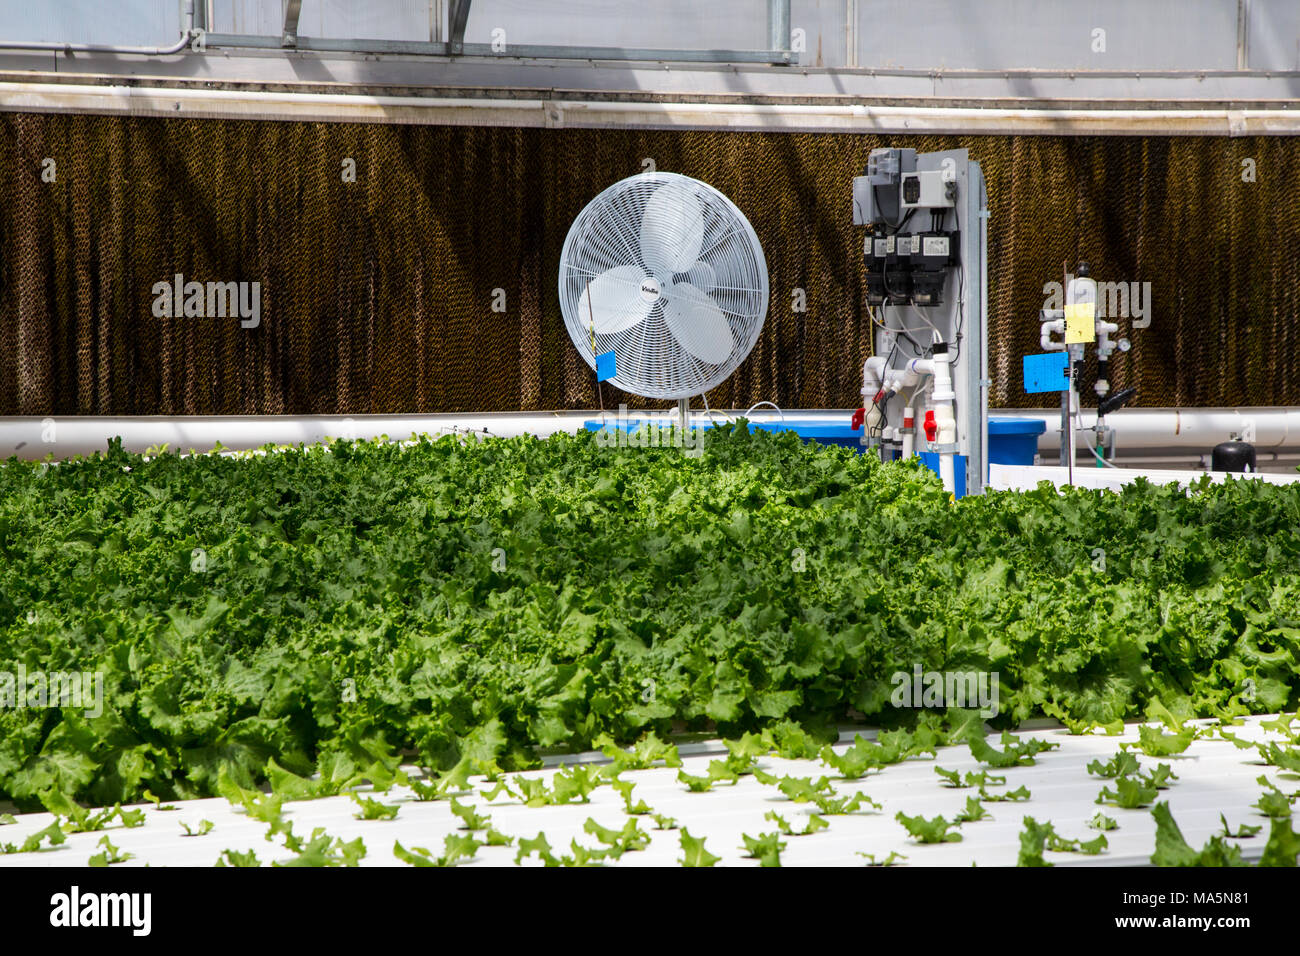 Hydroponic Agriculture.  Greenhouse Growing Lettuce.  Dyersville, Iowa, USA. Stock Photo